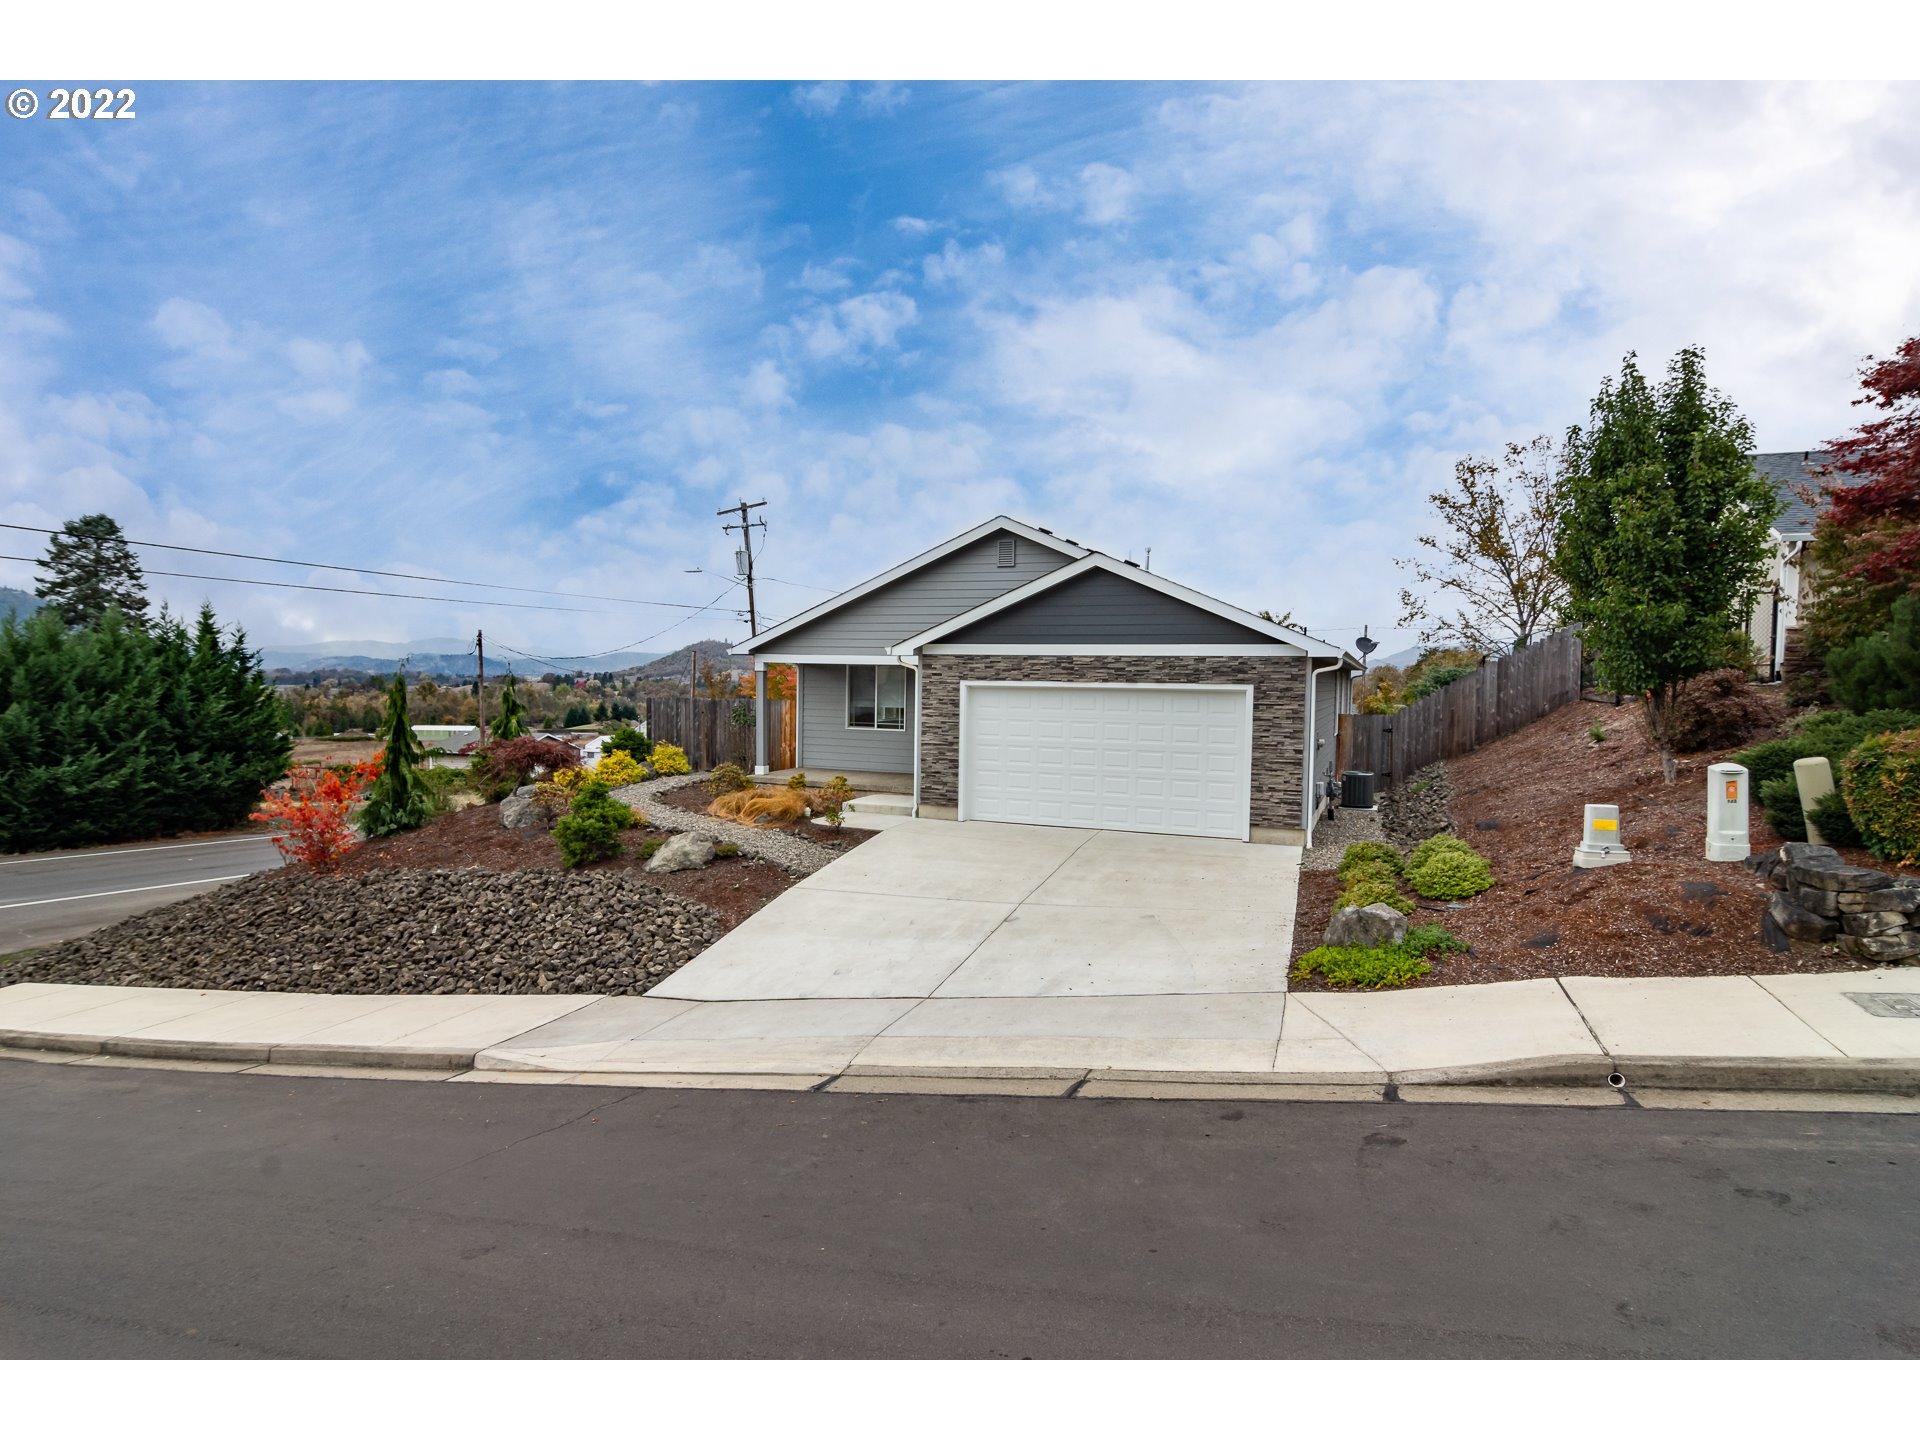 110 W FLANGAS AVE, Roseburg, OR 97471